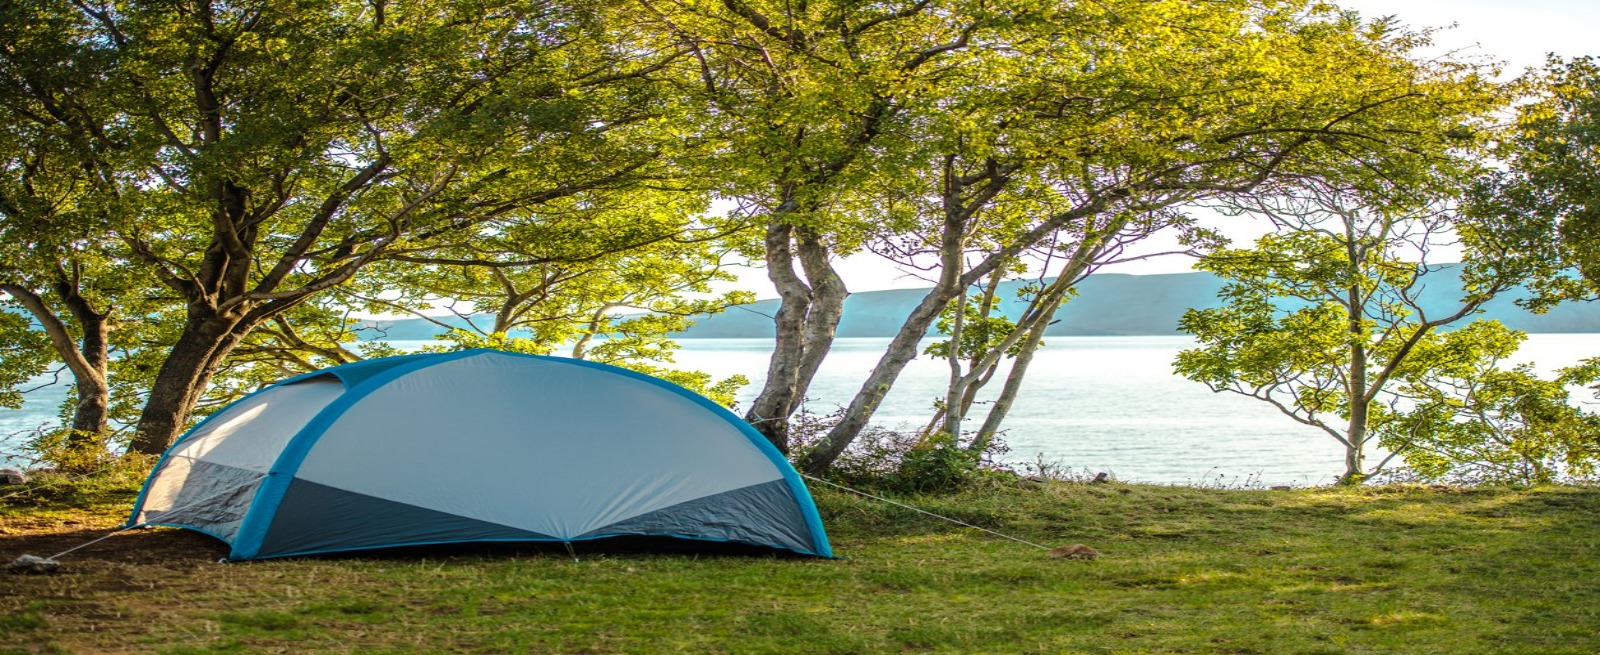 Tent beside a river.